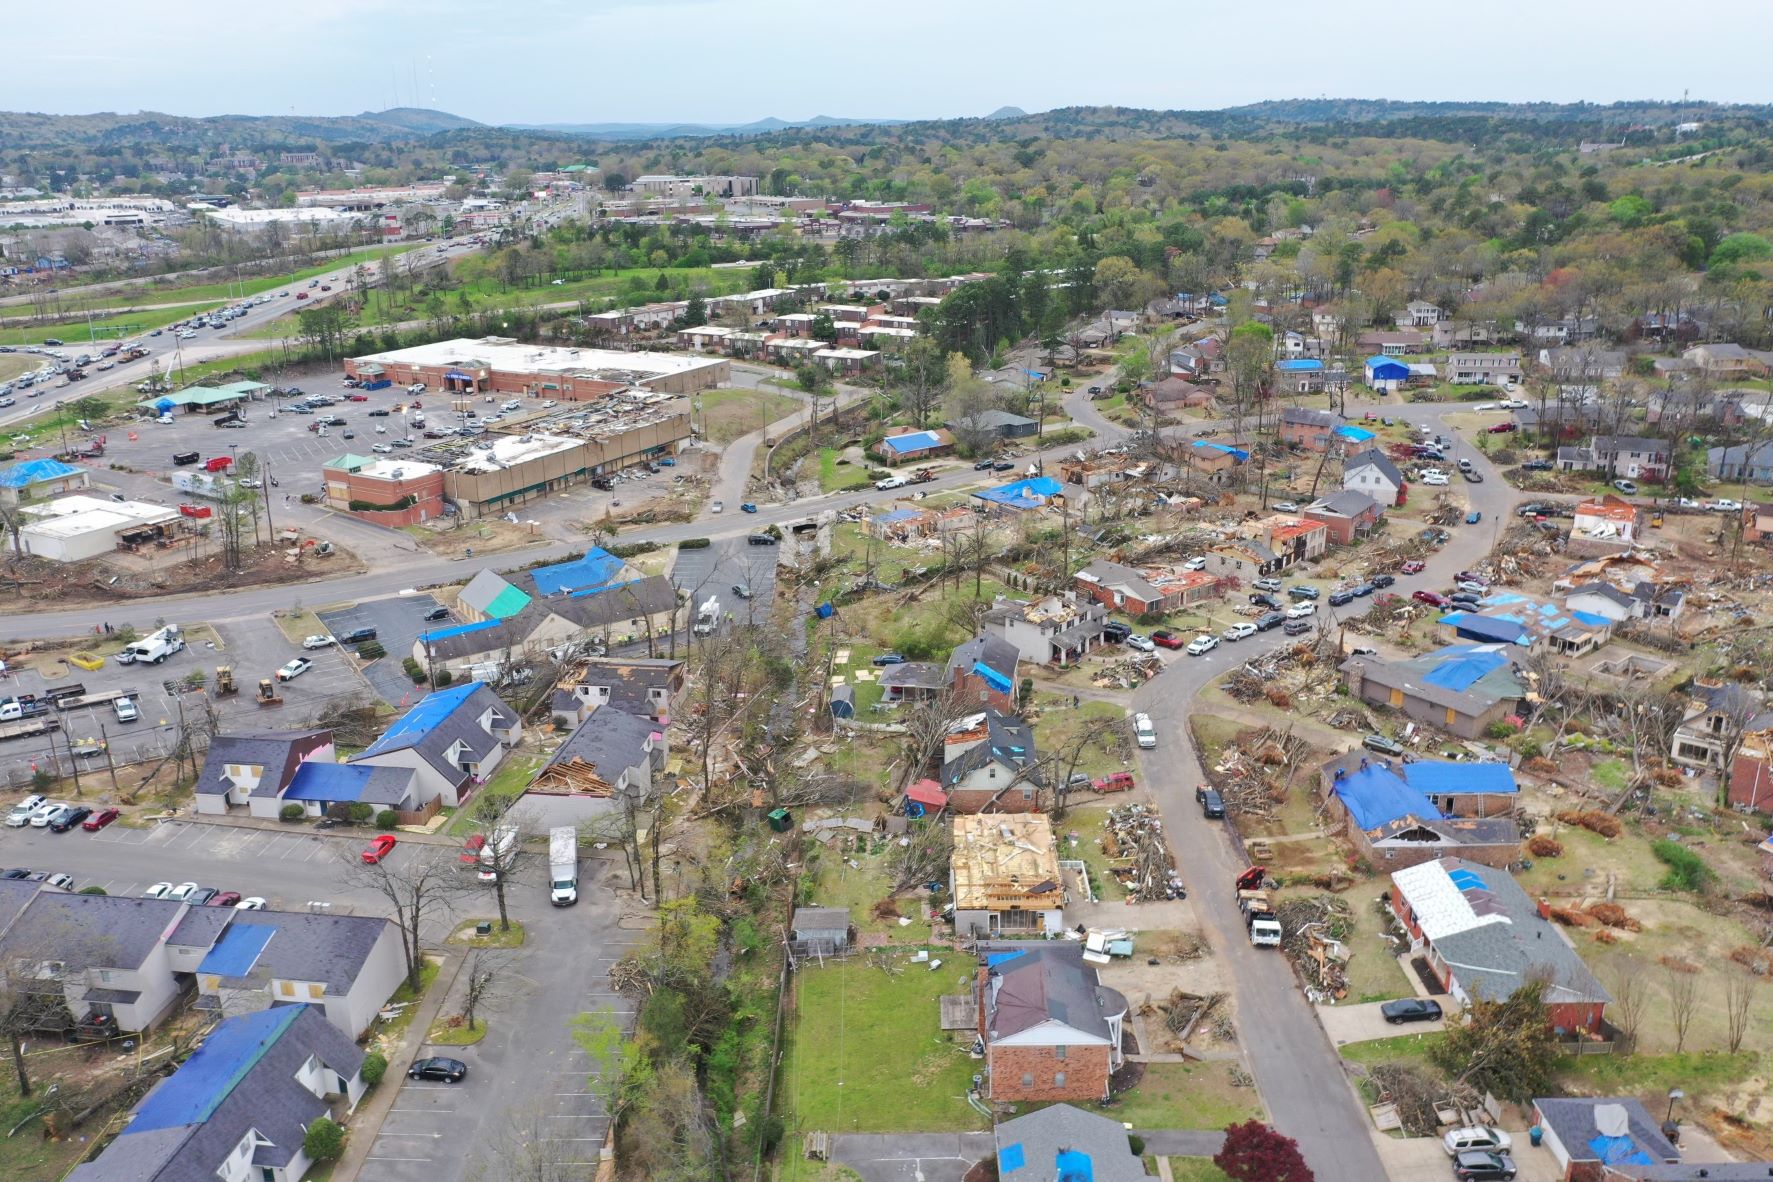 Blue tarps can be seen above Little Rock, evidence of the tornado damage that occurred. 